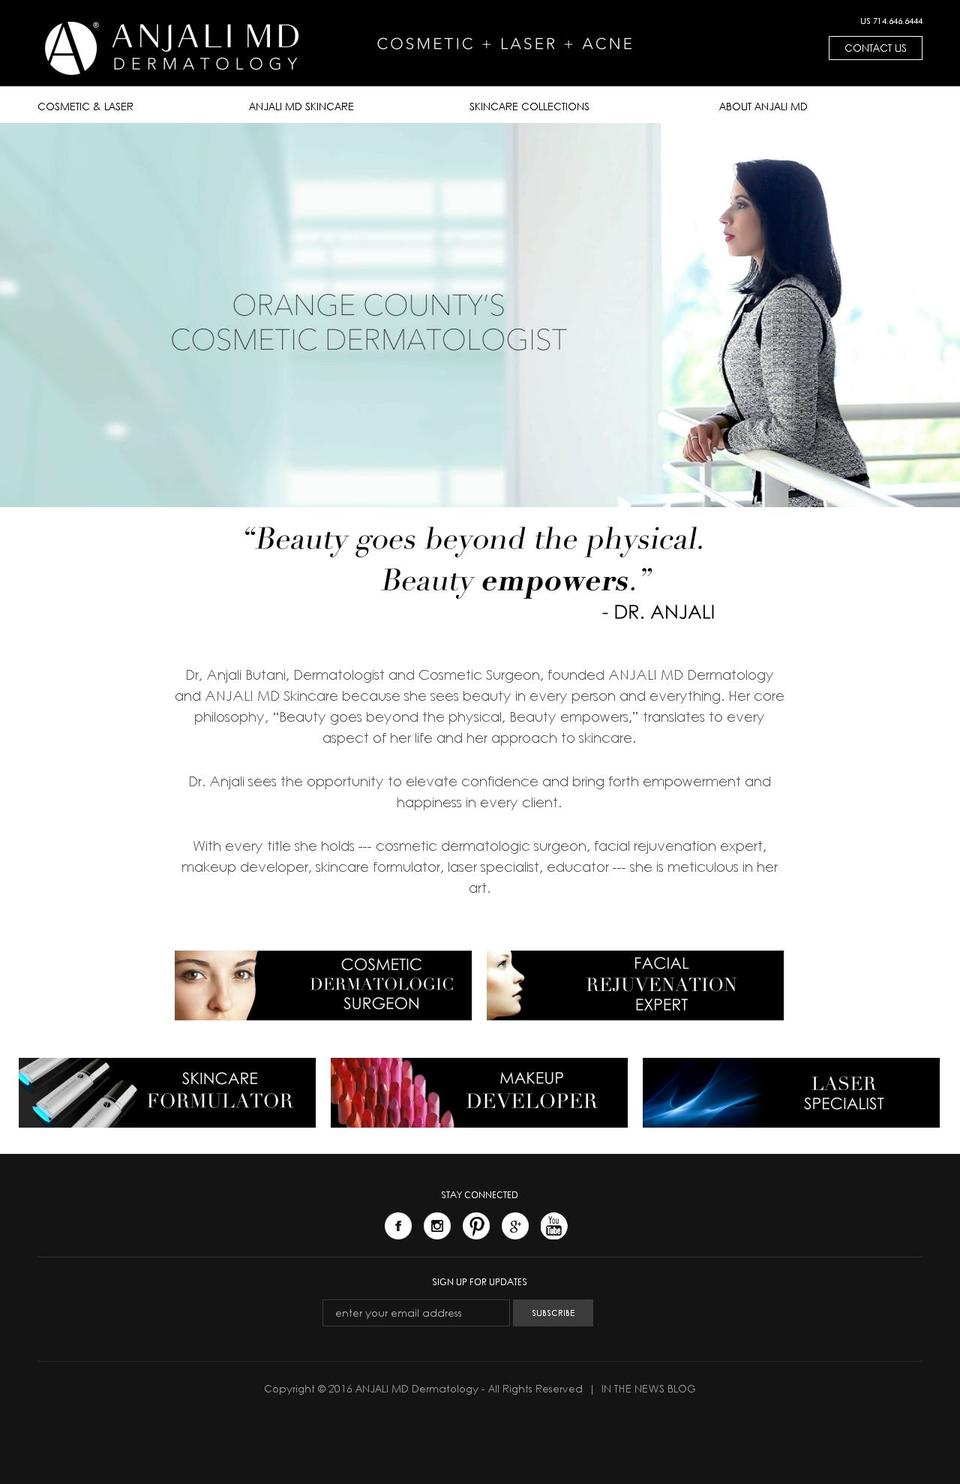 Anjali MD Site 2016 Shopify theme site example oclaserfacelift.net